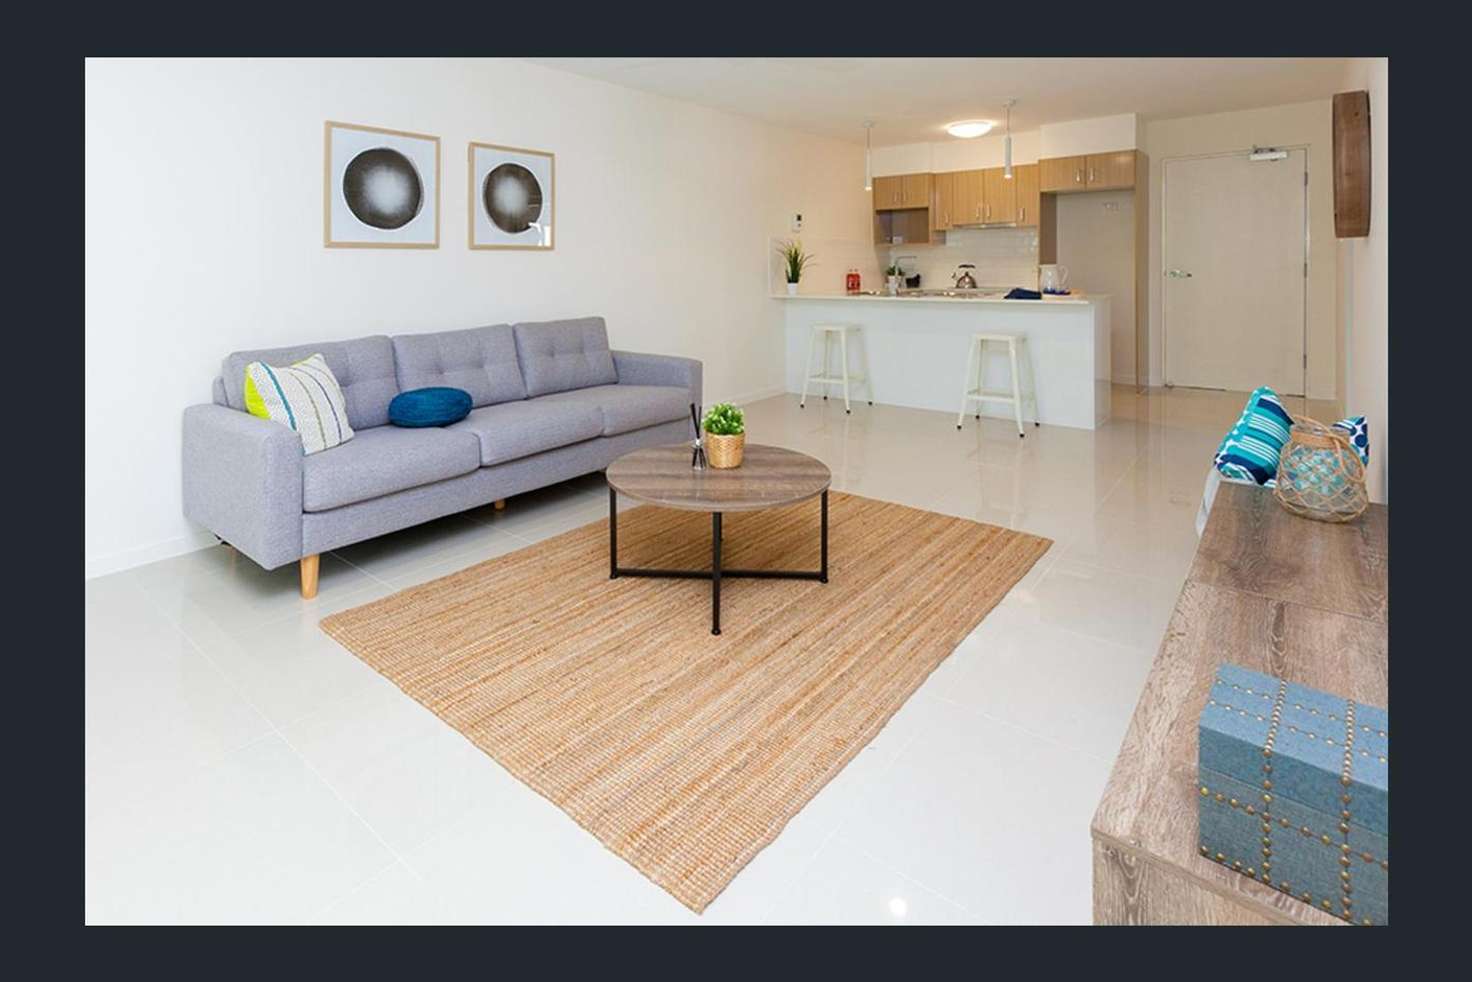 Main view of Homely apartment listing, 4/37 Mildmay Street, Fairfield QLD 4103